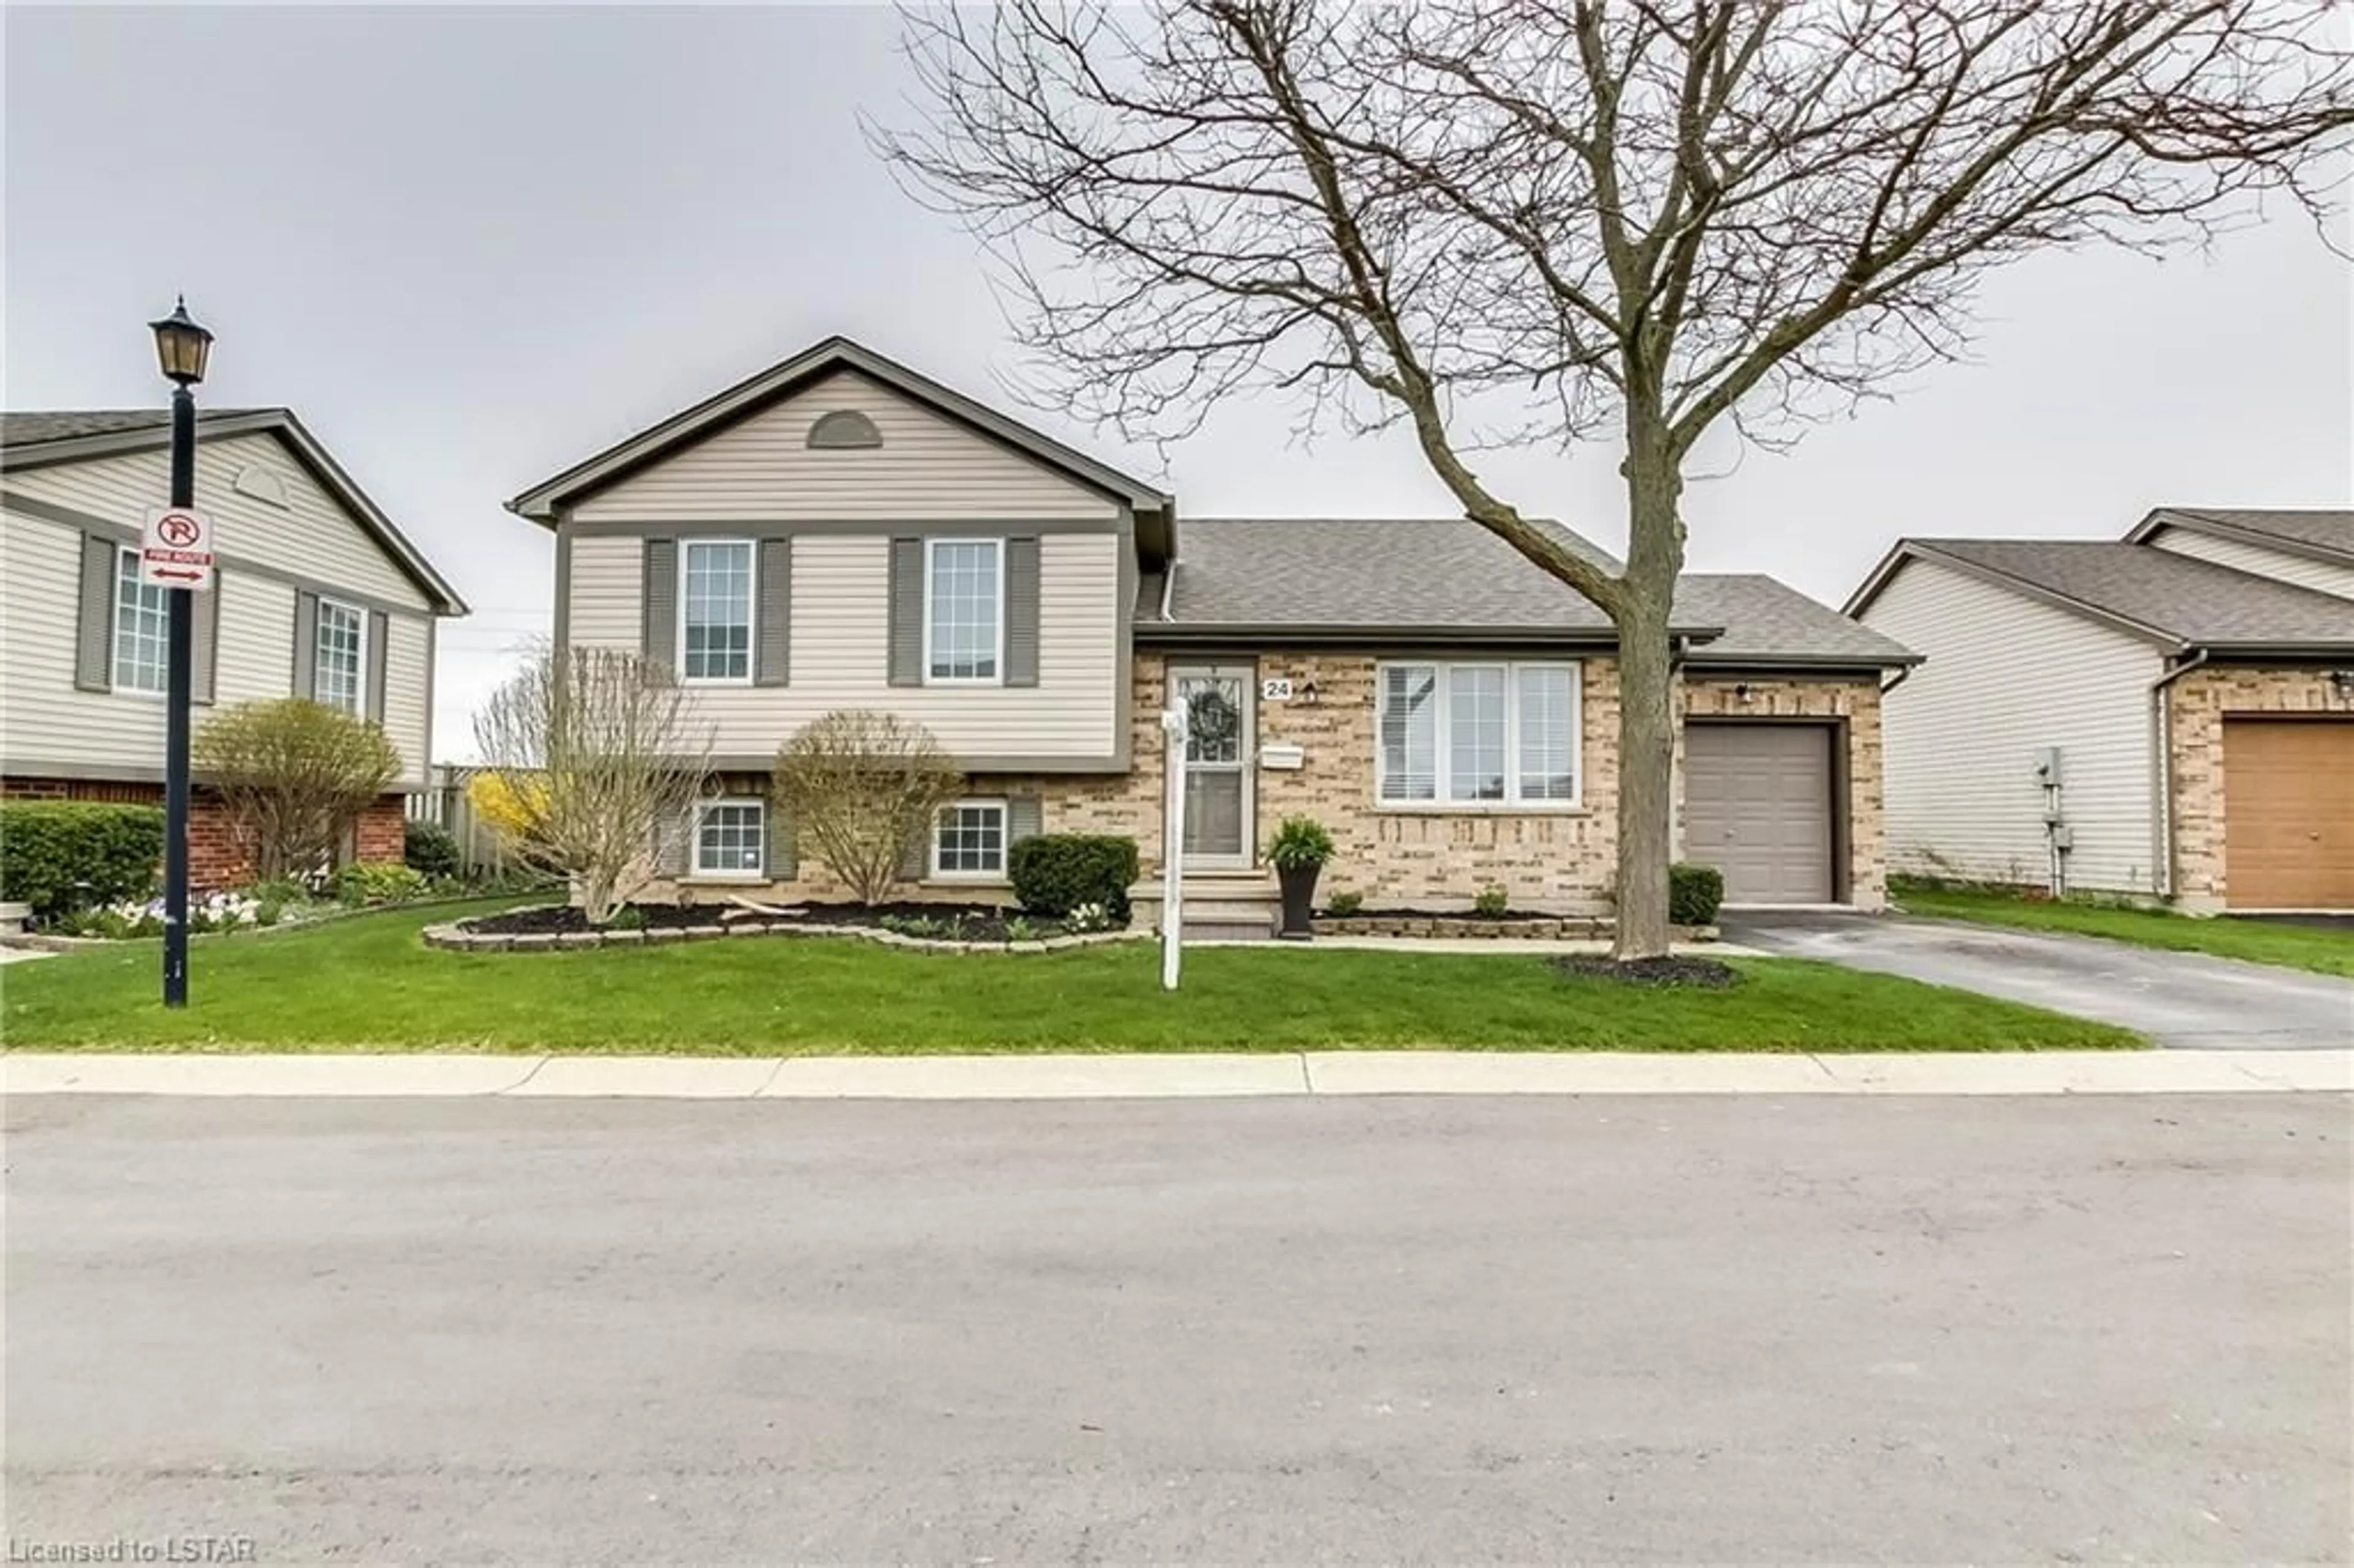 Frontside or backside of a home for 335 Lighthouse Rd #24, London Ontario N6M 1J8